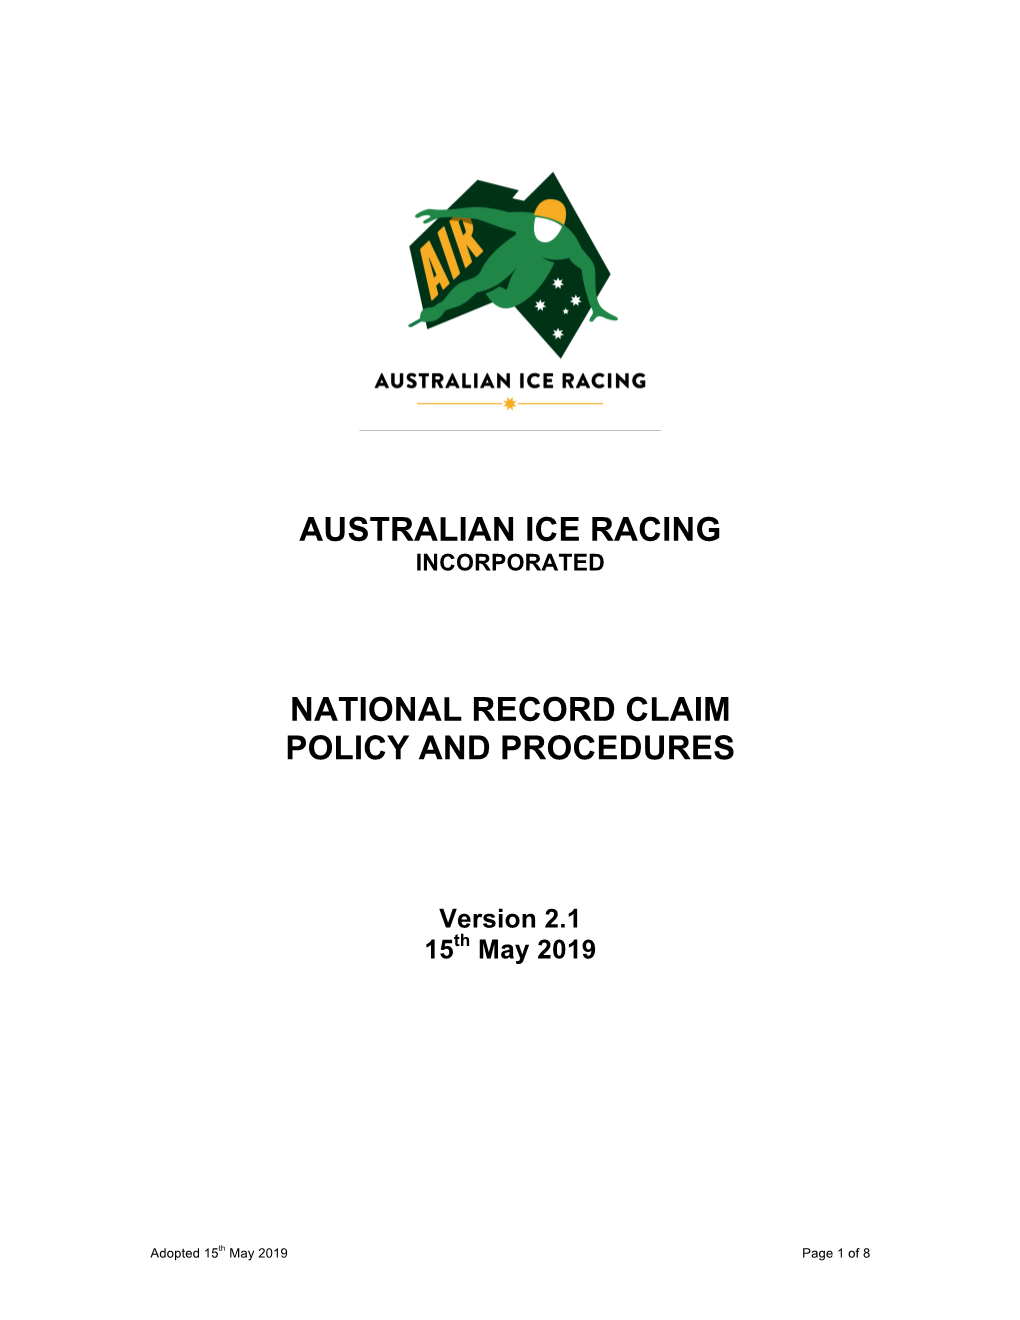 National Record Claim Policy Procedures